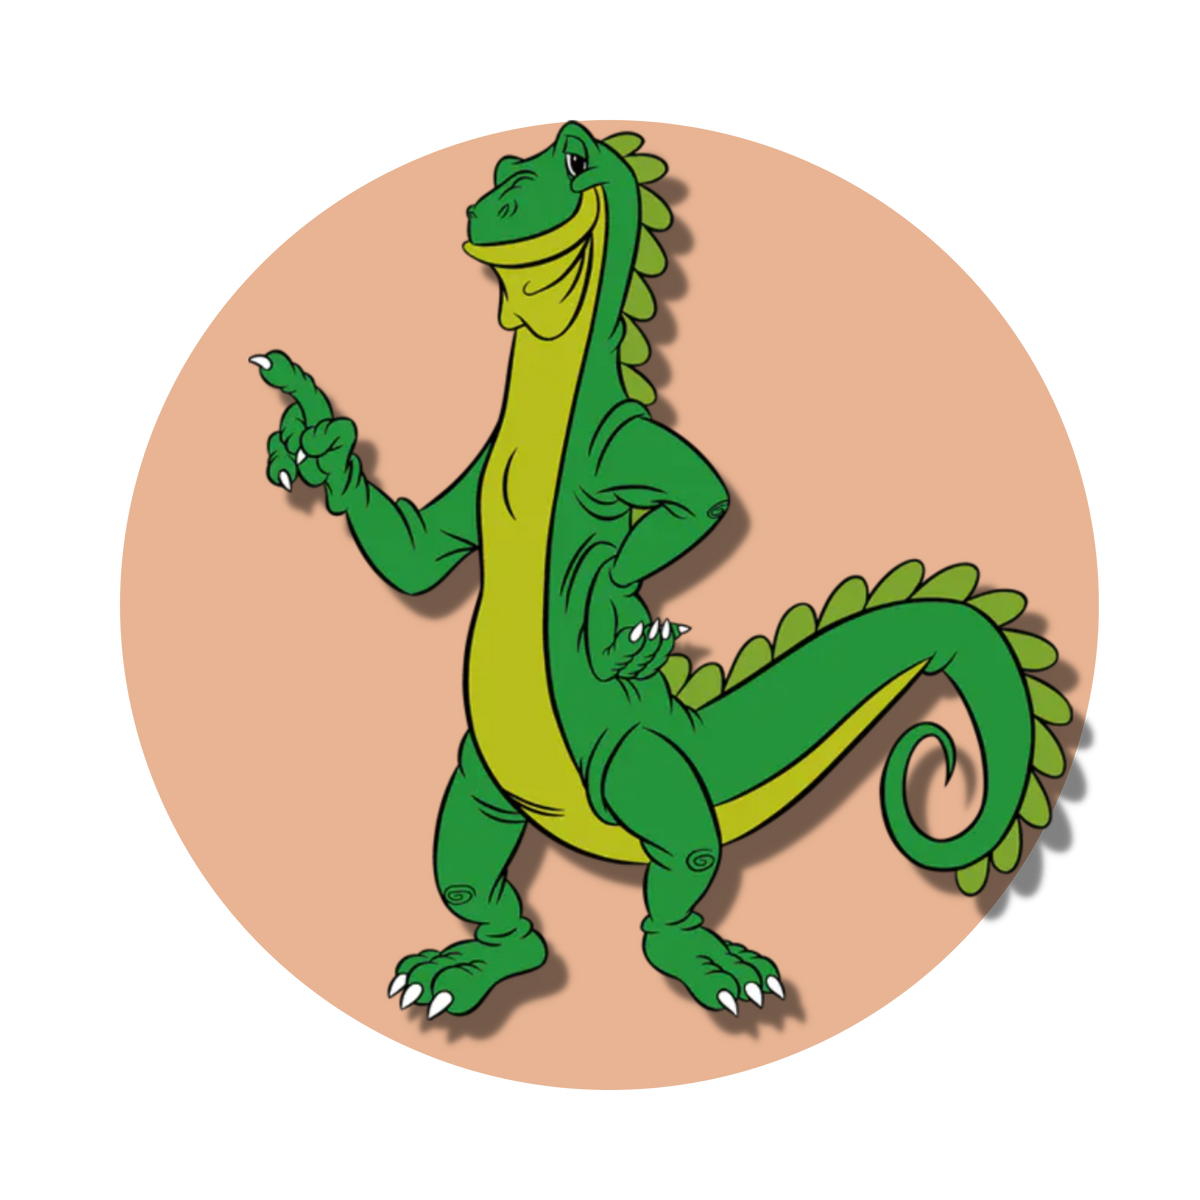 a green, anthropomorphic dinosaur character standing upright on two legs. It has a friendly expression, a long tail, and scales along its back. The dinosaur is gesturing with its right hand, as if waving or pointing to something. Set against a round, peach-colored background.